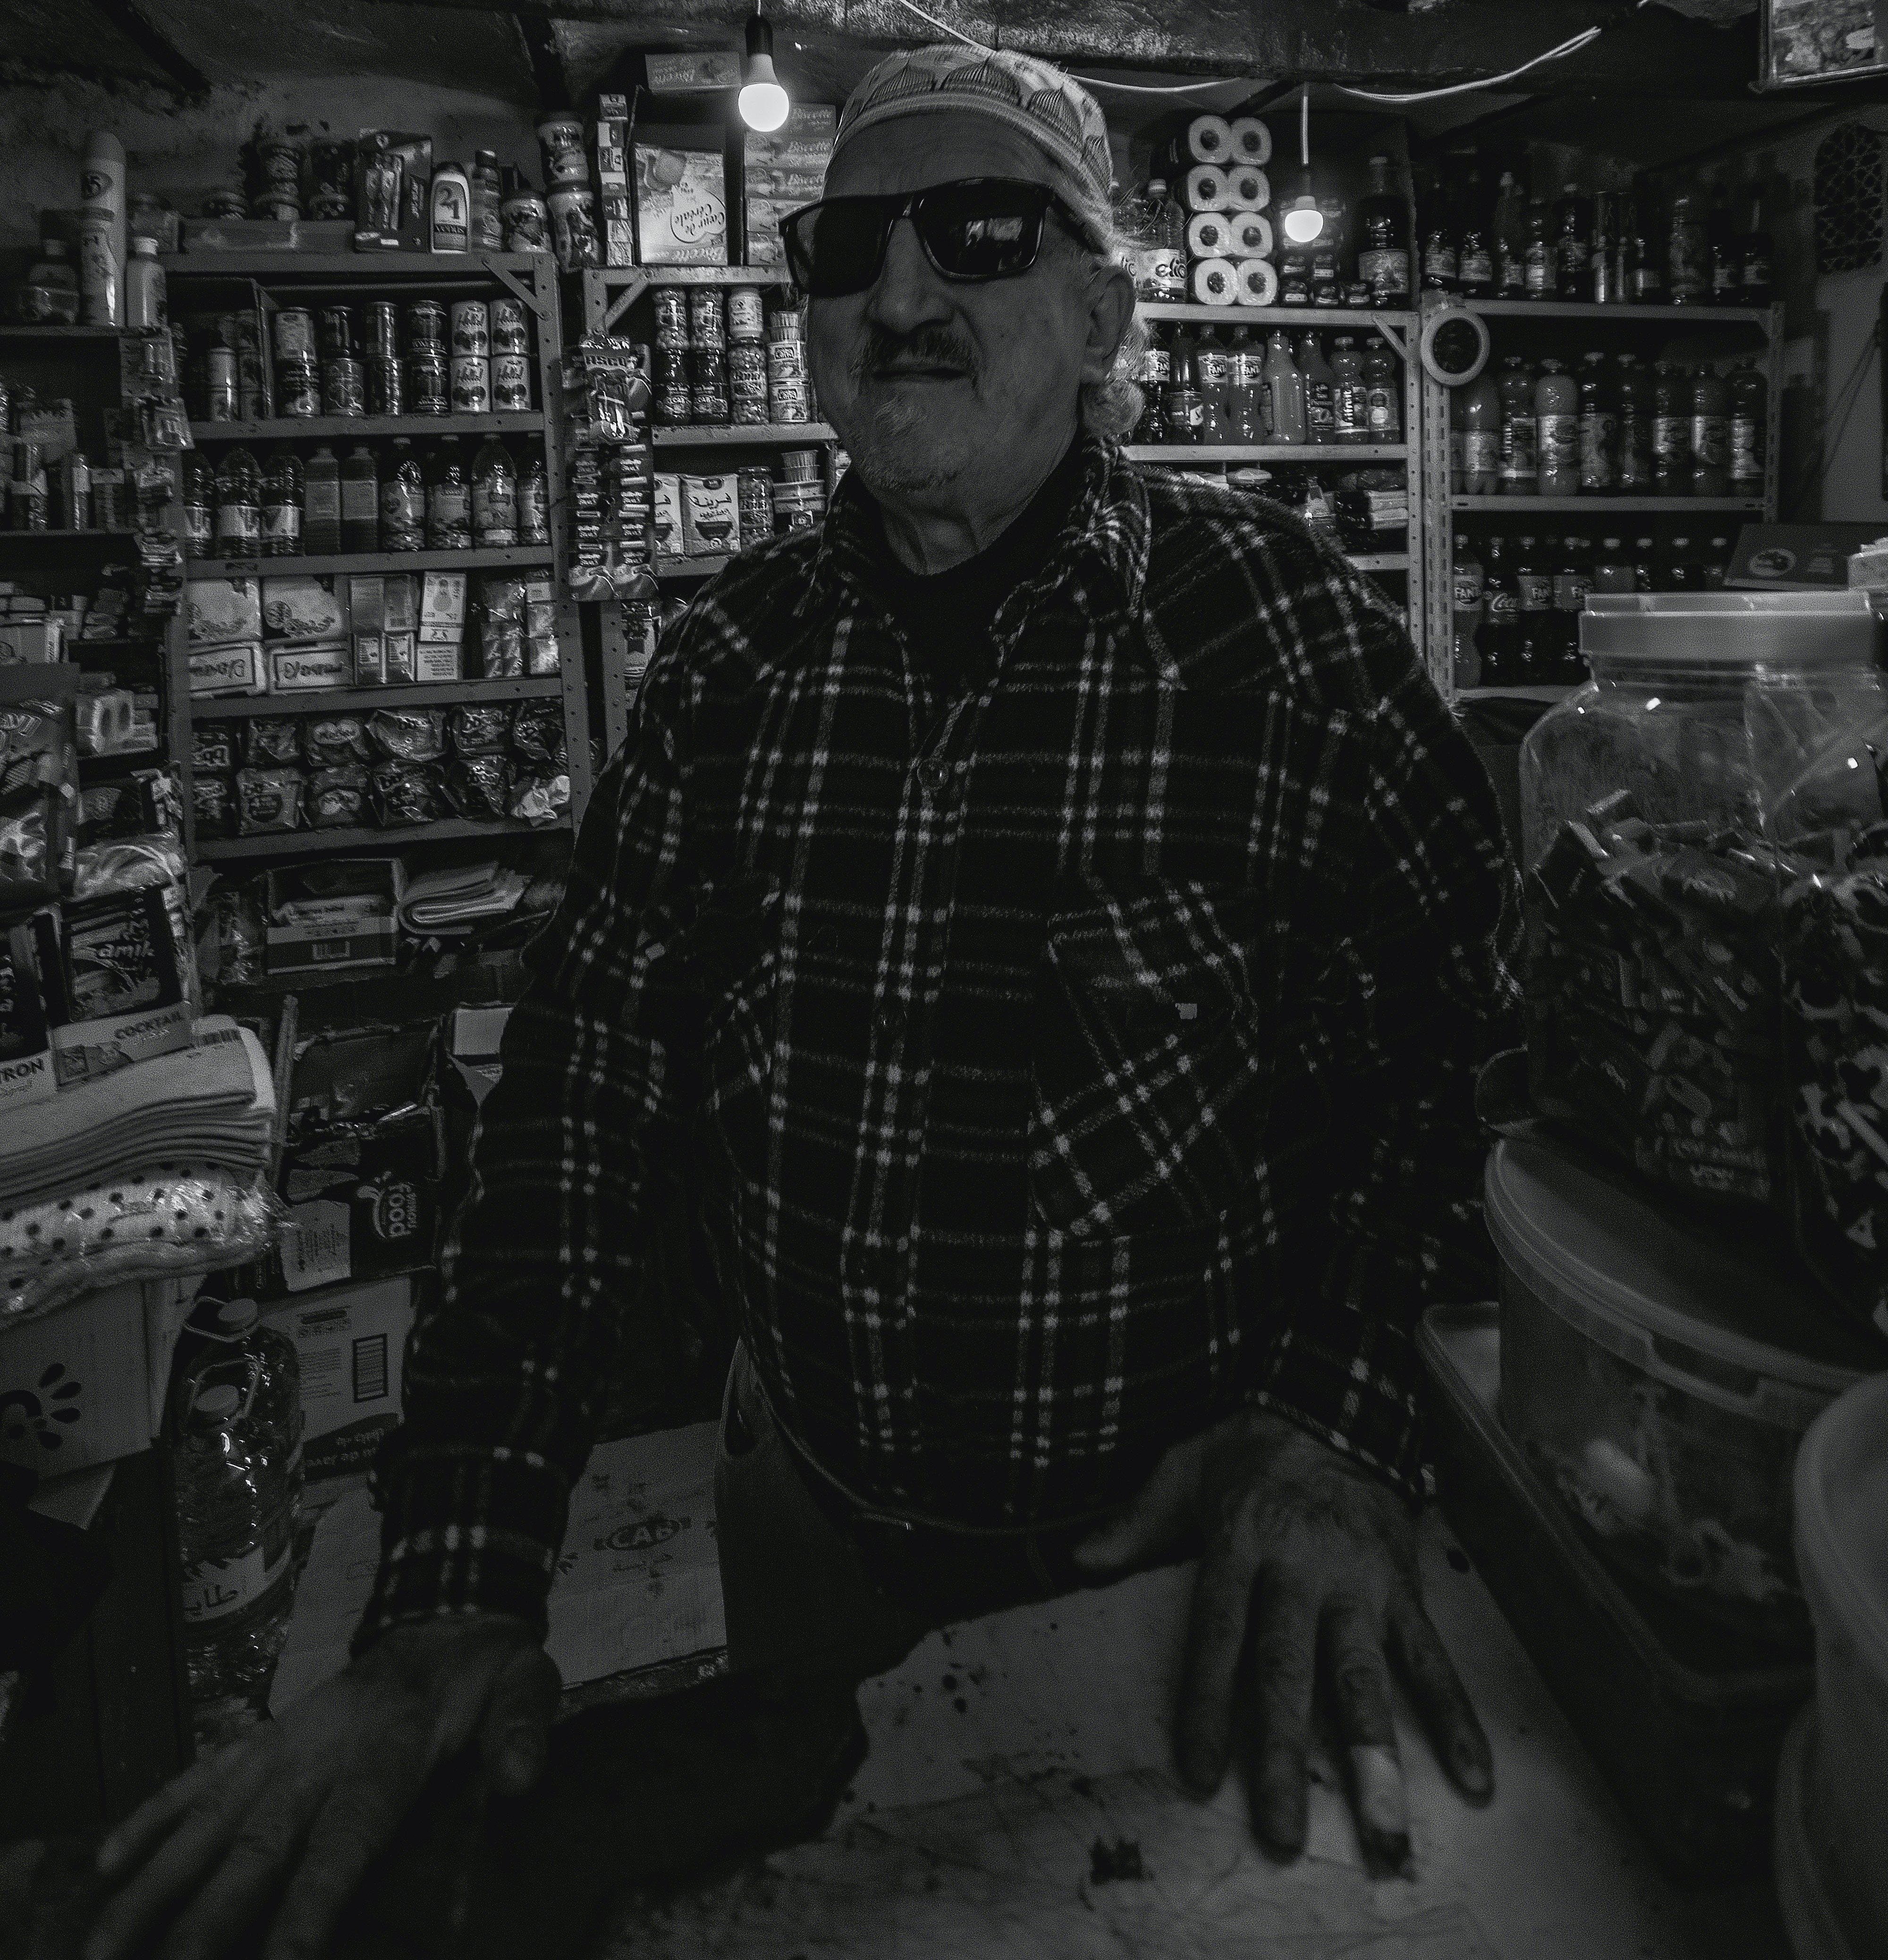 Thomas went to the store in disguise and pretended to be blind. | Source: Unsplash